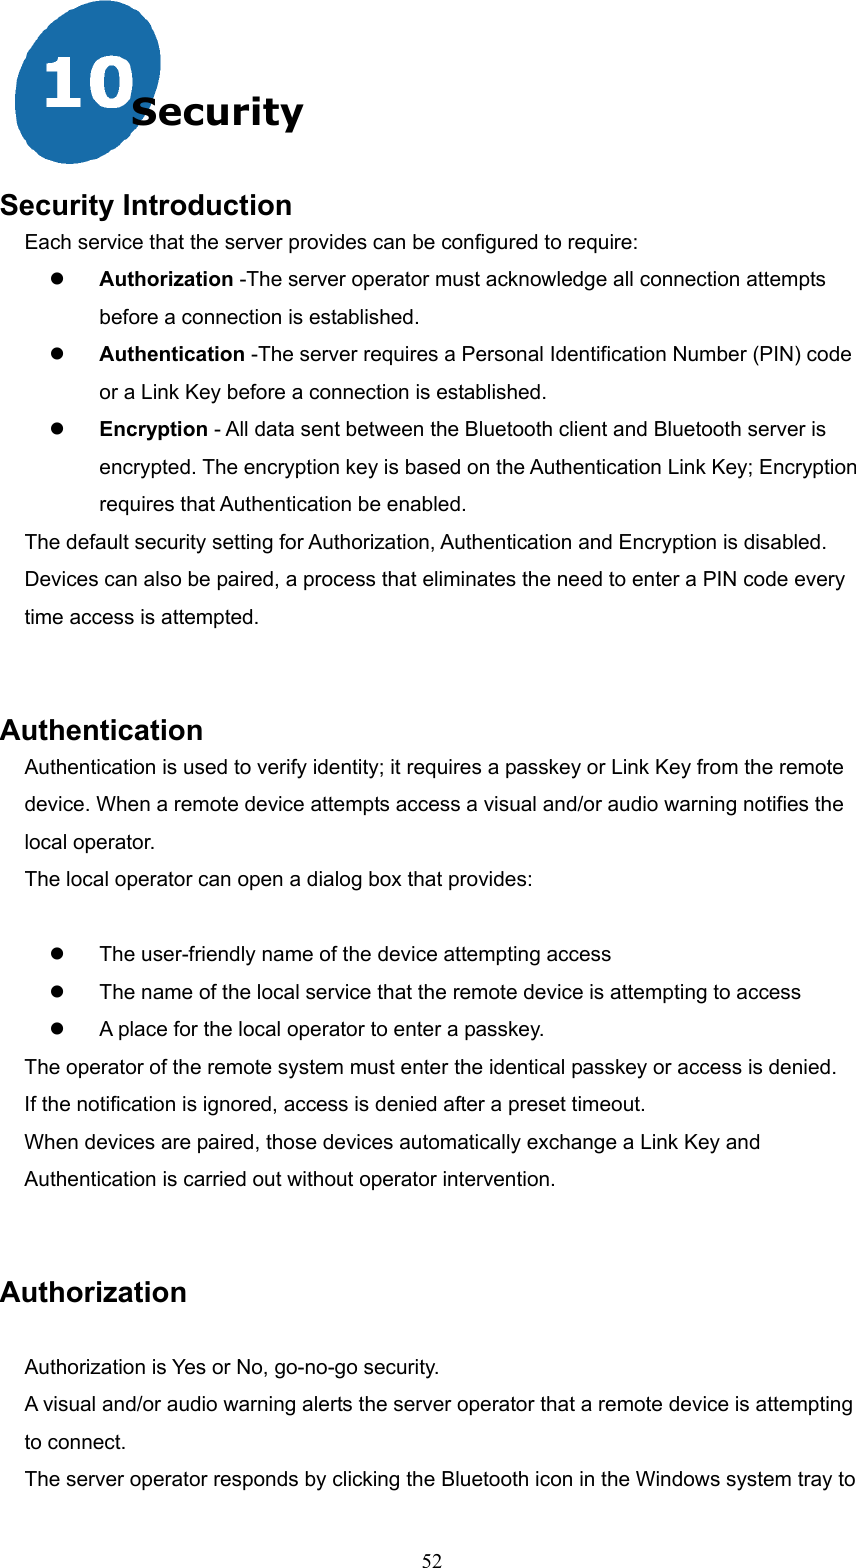  52 Security   Security Introduction Each service that the server provides can be configured to require:   Authorization -The server operator must acknowledge all connection attempts before a connection is established.   Authentication -The server requires a Personal Identification Number (PIN) code or a Link Key before a connection is established.   Encryption - All data sent between the Bluetooth client and Bluetooth server is encrypted. The encryption key is based on the Authentication Link Key; Encryption requires that Authentication be enabled. The default security setting for Authorization, Authentication and Encryption is disabled. Devices can also be paired, a process that eliminates the need to enter a PIN code every time access is attempted.   Authentication Authentication is used to verify identity; it requires a passkey or Link Key from the remote device. When a remote device attempts access a visual and/or audio warning notifies the local operator. The local operator can open a dialog box that provides:    The user-friendly name of the device attempting access   The name of the local service that the remote device is attempting to access   A place for the local operator to enter a passkey. The operator of the remote system must enter the identical passkey or access is denied. If the notification is ignored, access is denied after a preset timeout. When devices are paired, those devices automatically exchange a Link Key and Authentication is carried out without operator intervention.   Authorization  Authorization is Yes or No, go-no-go security. A visual and/or audio warning alerts the server operator that a remote device is attempting to connect. The server operator responds by clicking the Bluetooth icon in the Windows system tray to 